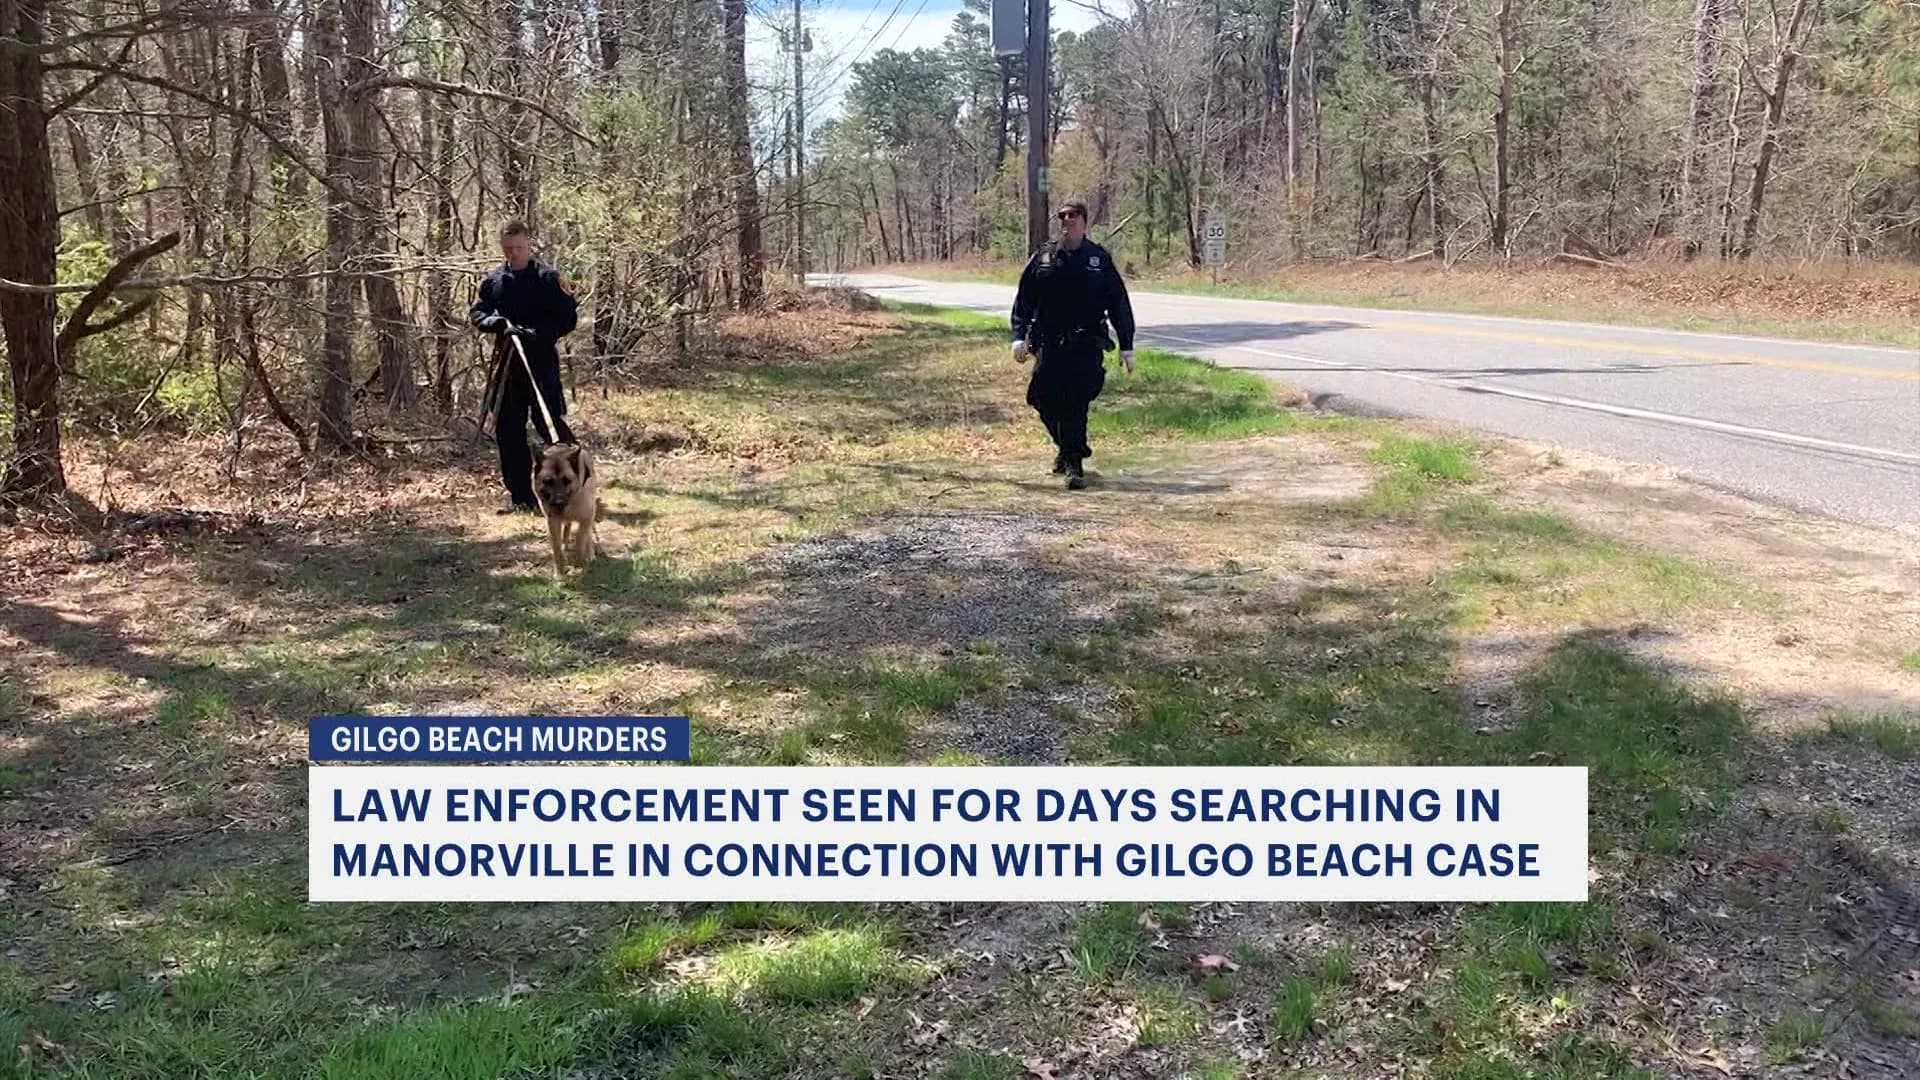  Law enforcement seen for days searching in Manorville in connection with Gilgo Beach case